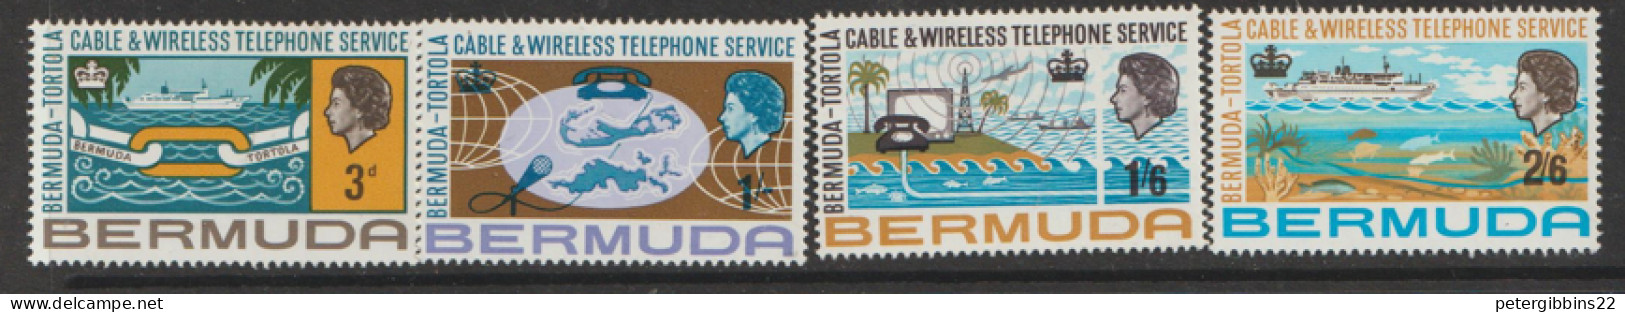 Bermuda 1967 SG  208-11  Cable And Wireless   Lightly Mounted Mint - Bermuda